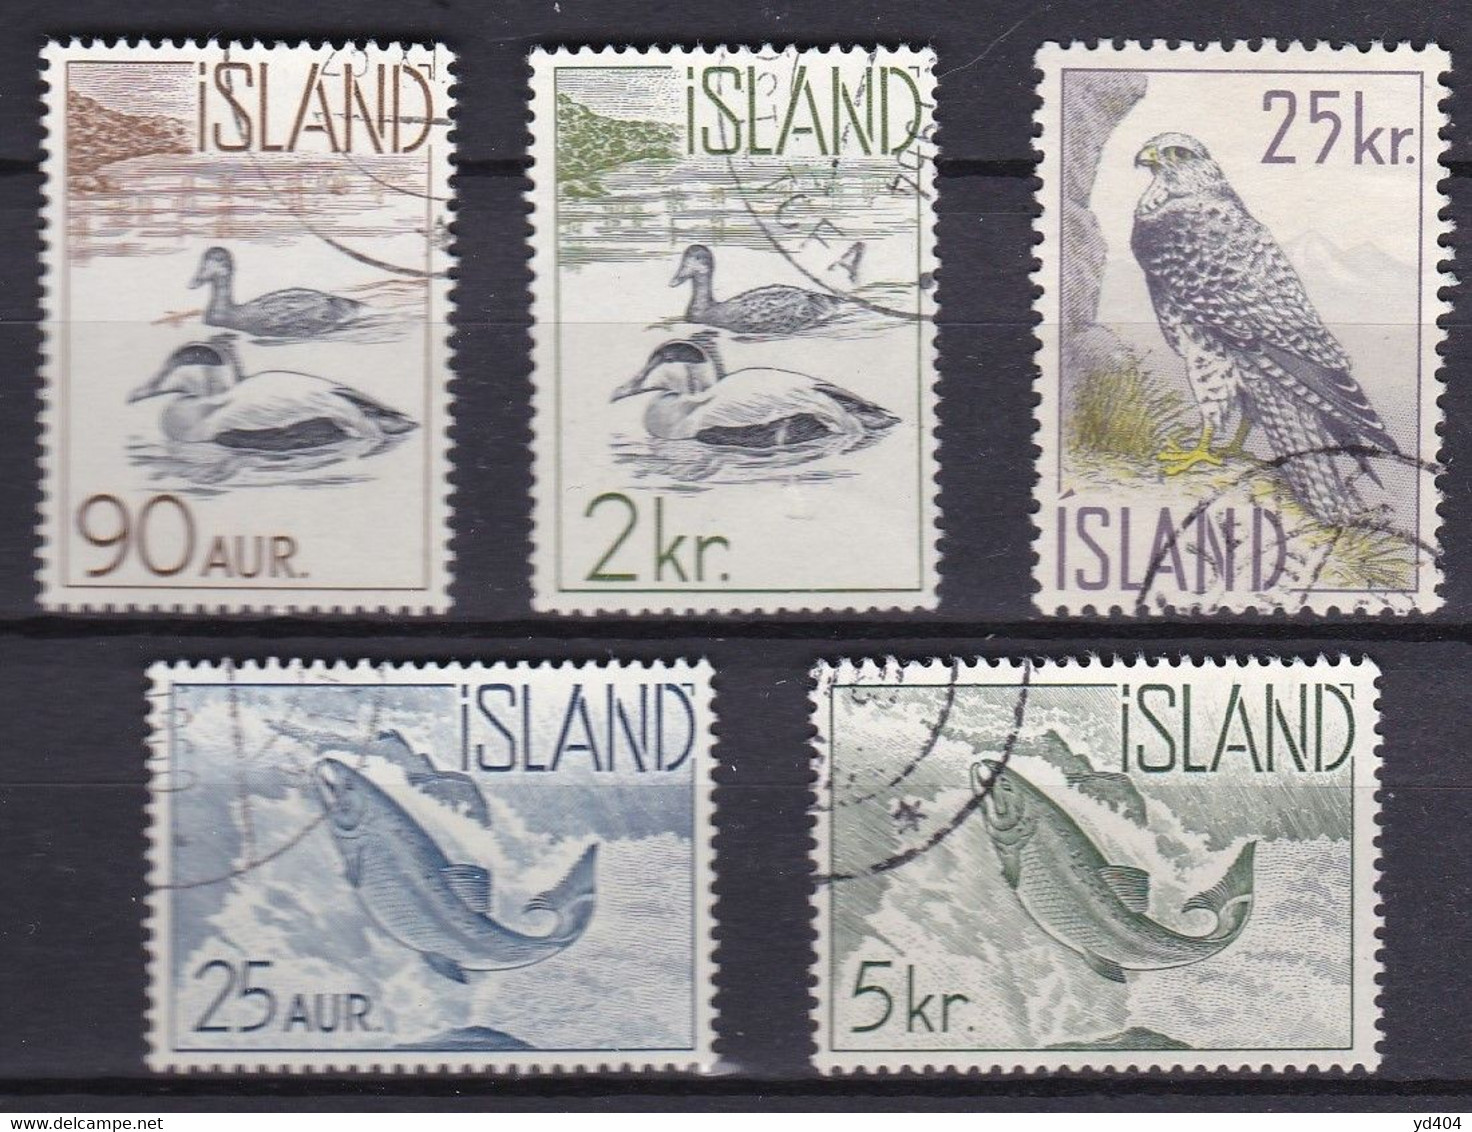 IS064B – ISLANDE – ICELAND – 1959-60 – FAUNA SET – Y&T # 294/8 USED 20 € - Used Stamps